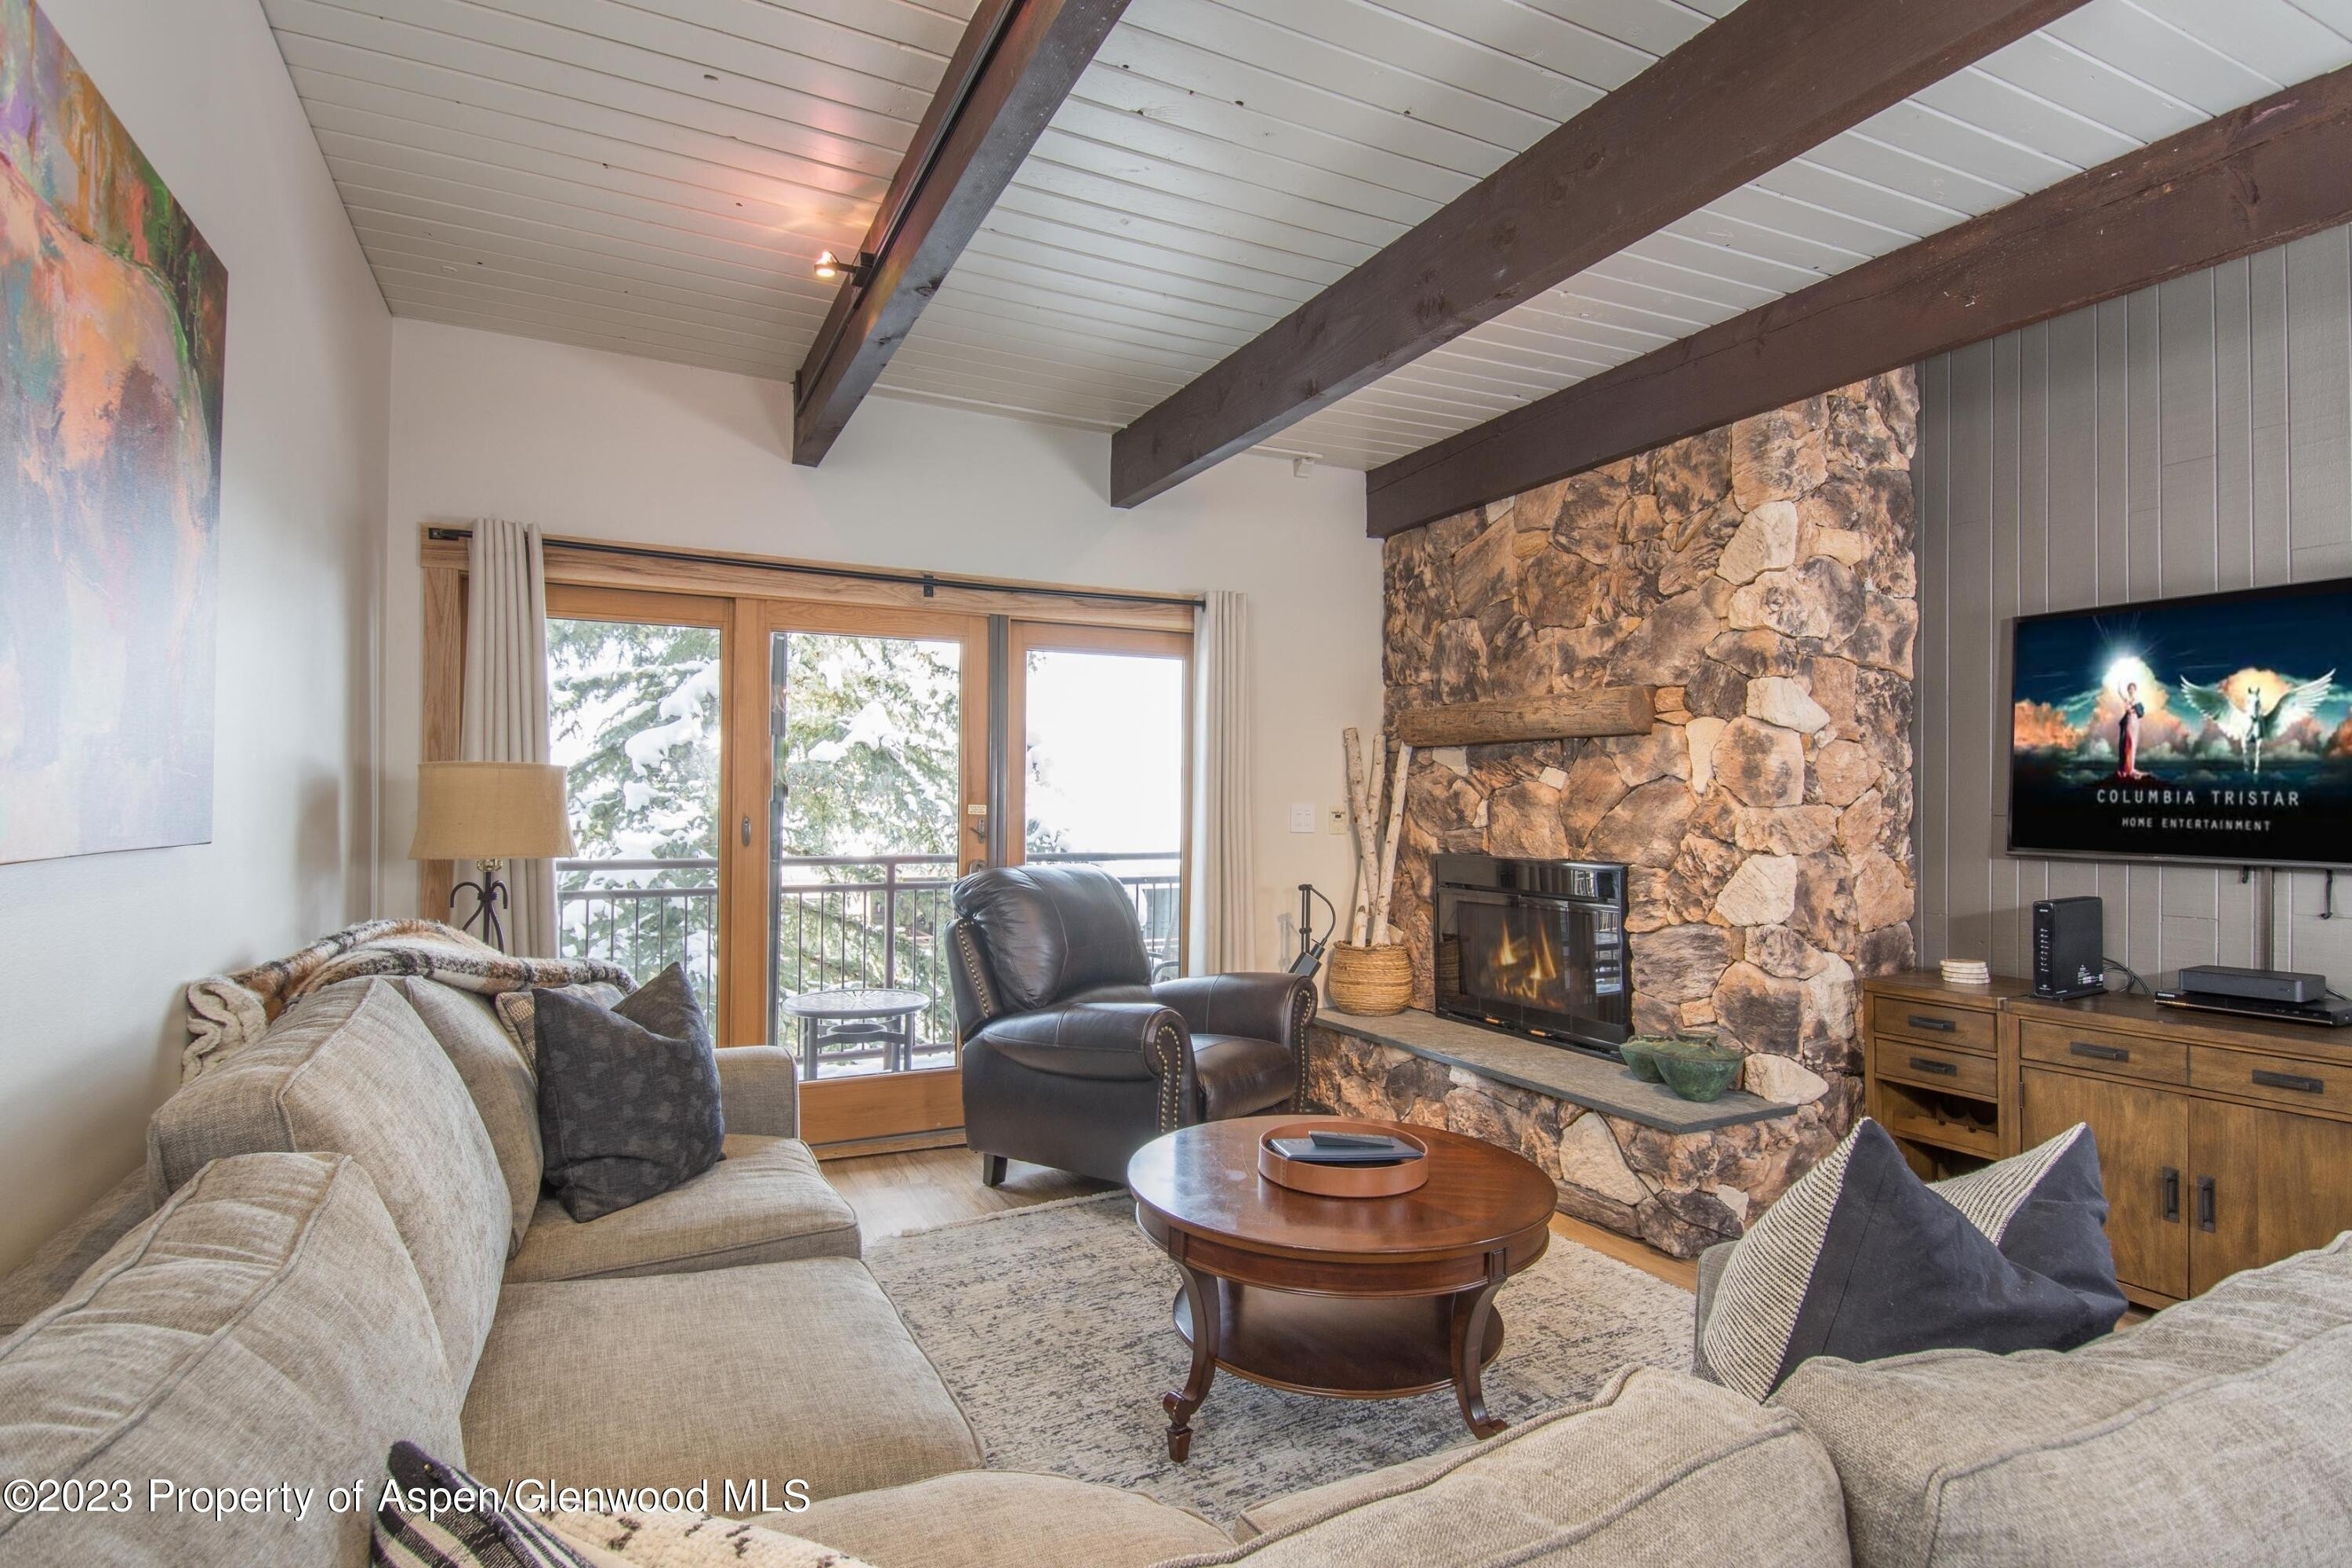 Property at 690 Carriage Way, C2C Snowmass Village, CO 81615